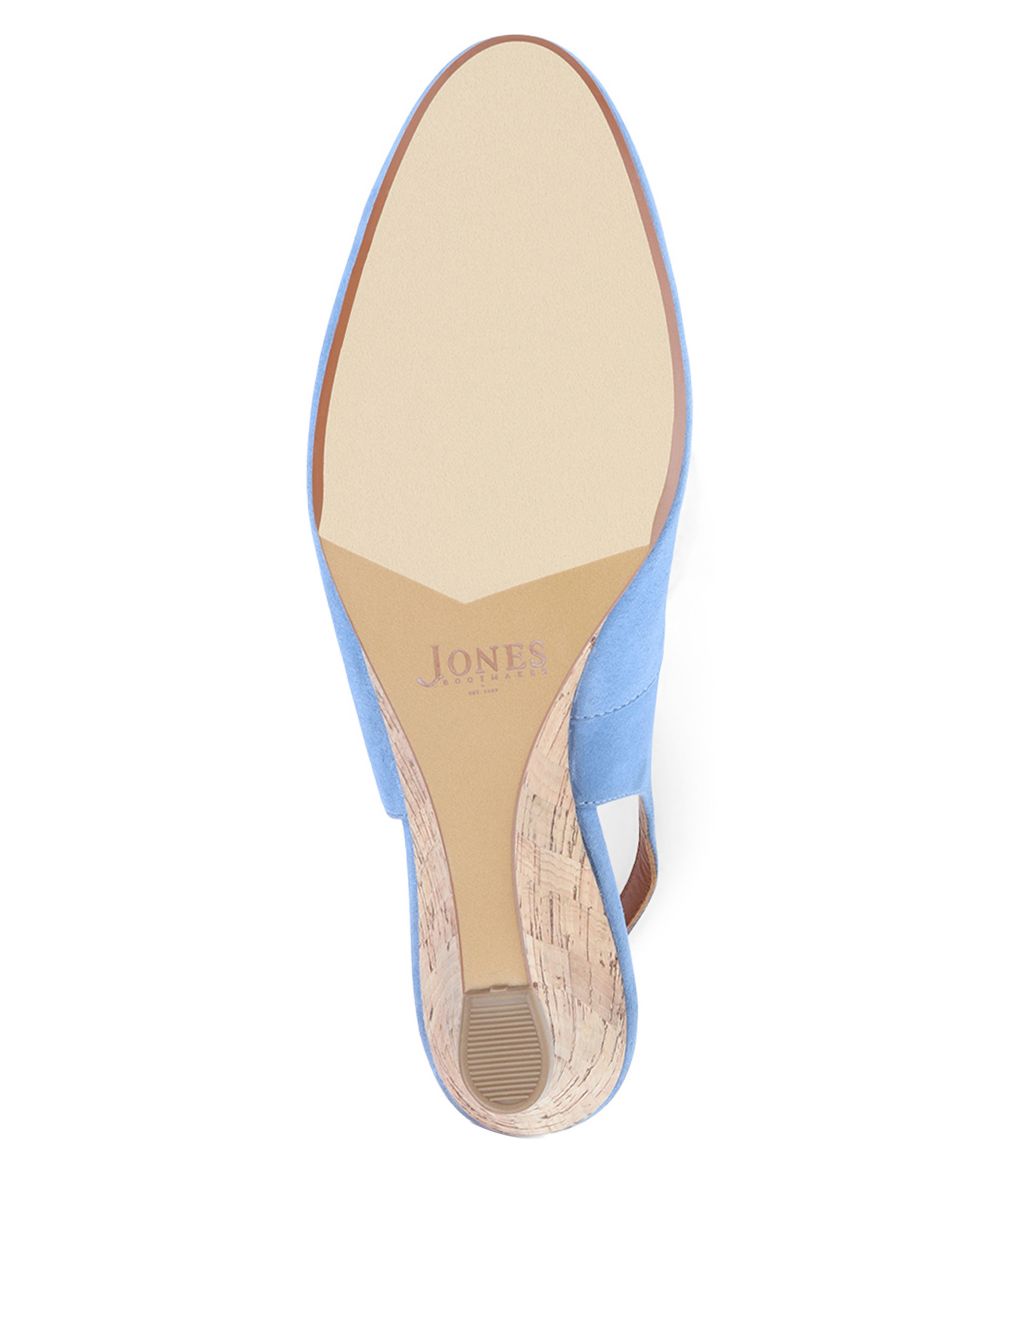 Suede Wedge Slingback Shoes image 6